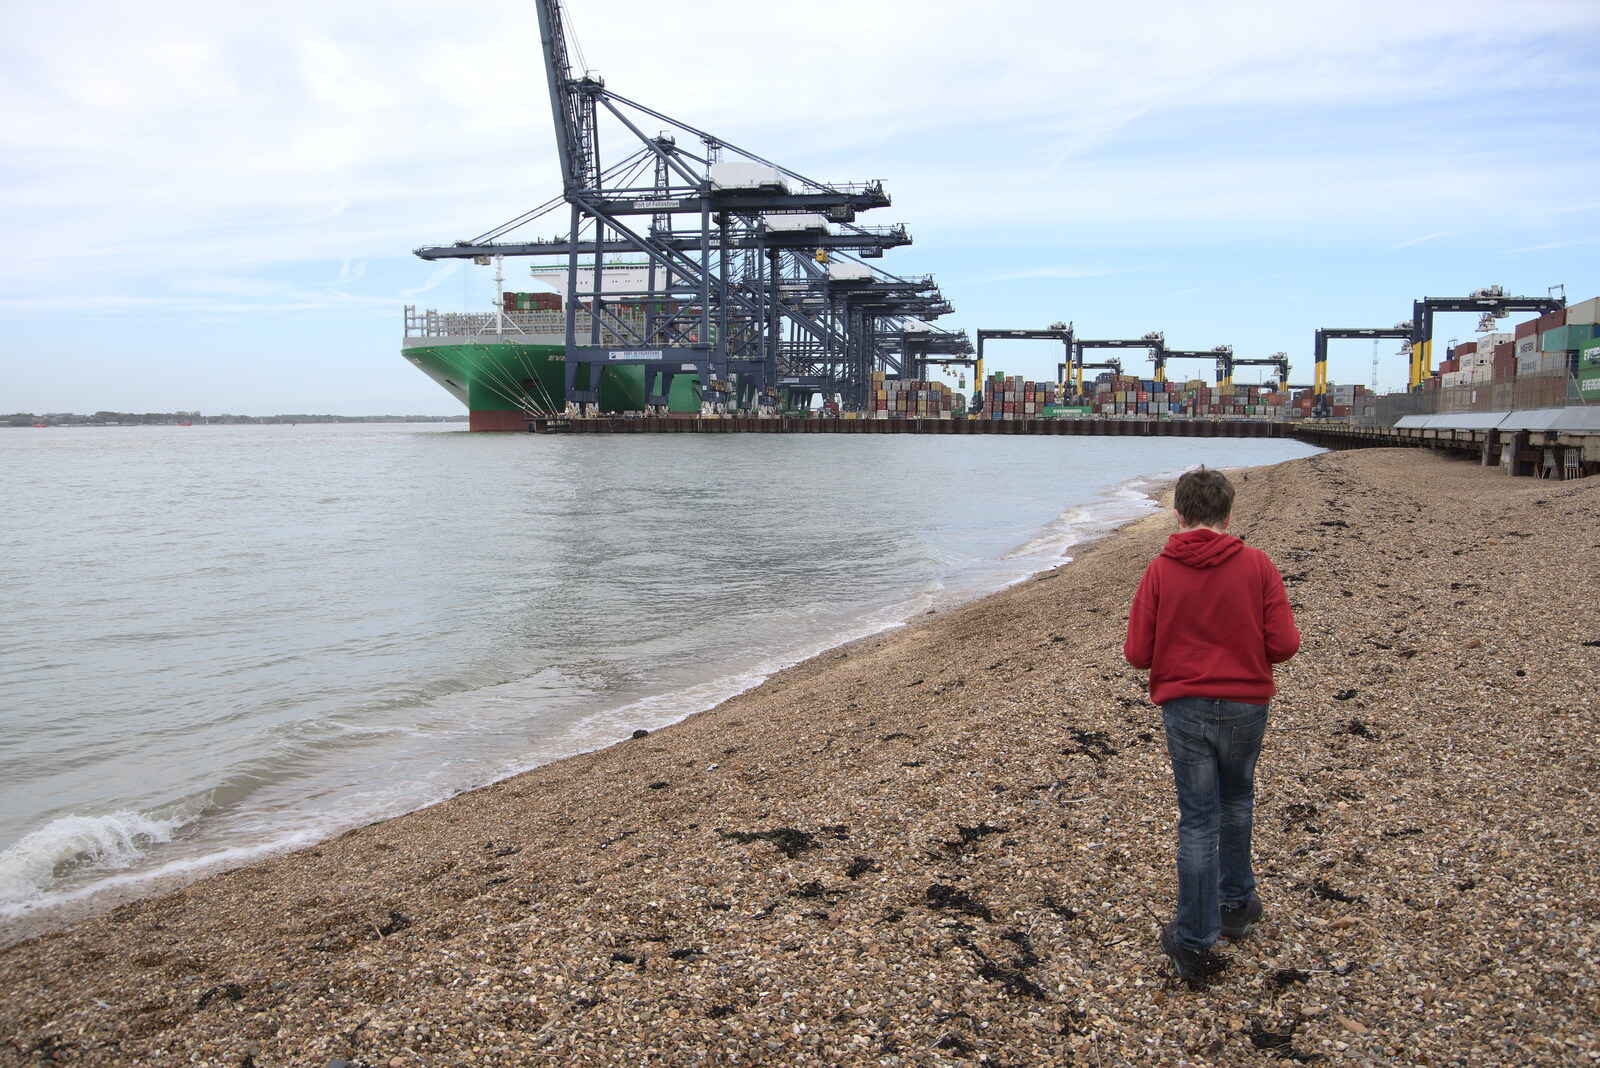 Fred walks the shoreline near the port from A Trip to Landguard Fort, Felixstowe, Suffolk - 16th October 2022